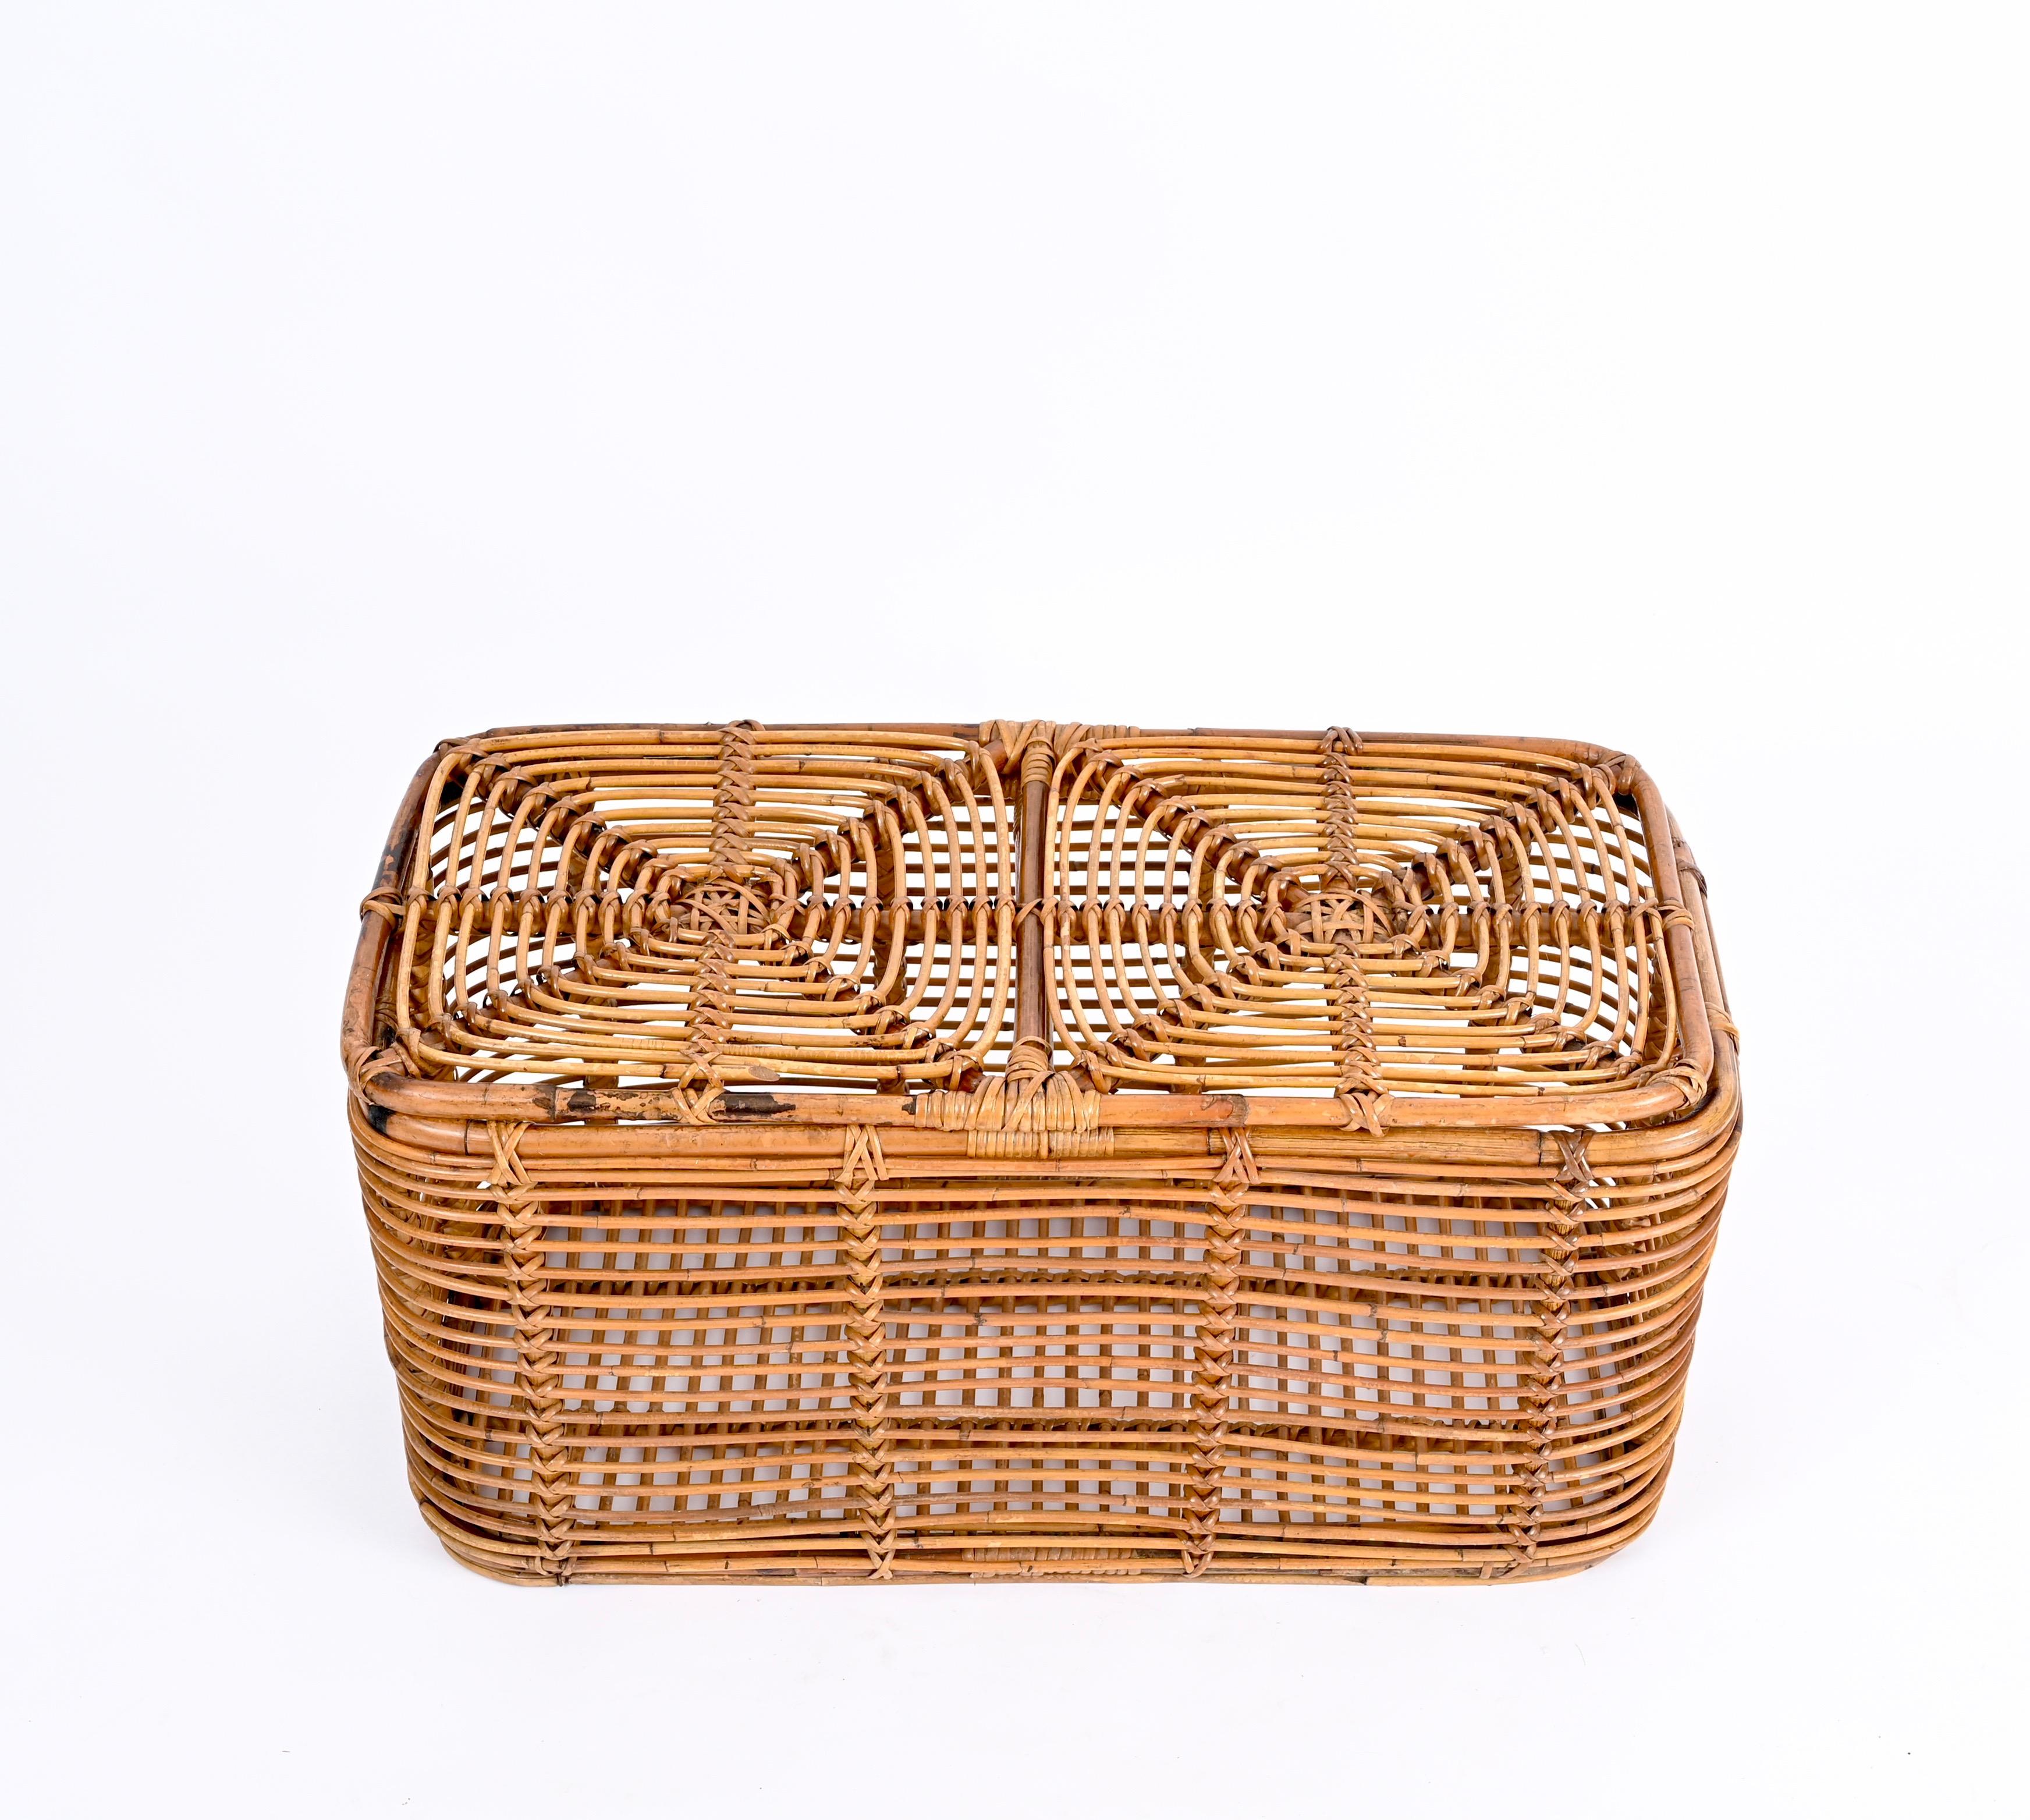 Midcentury French Riviera Bamboo and Woven Rattan Italian Basket, 1960s For Sale 9